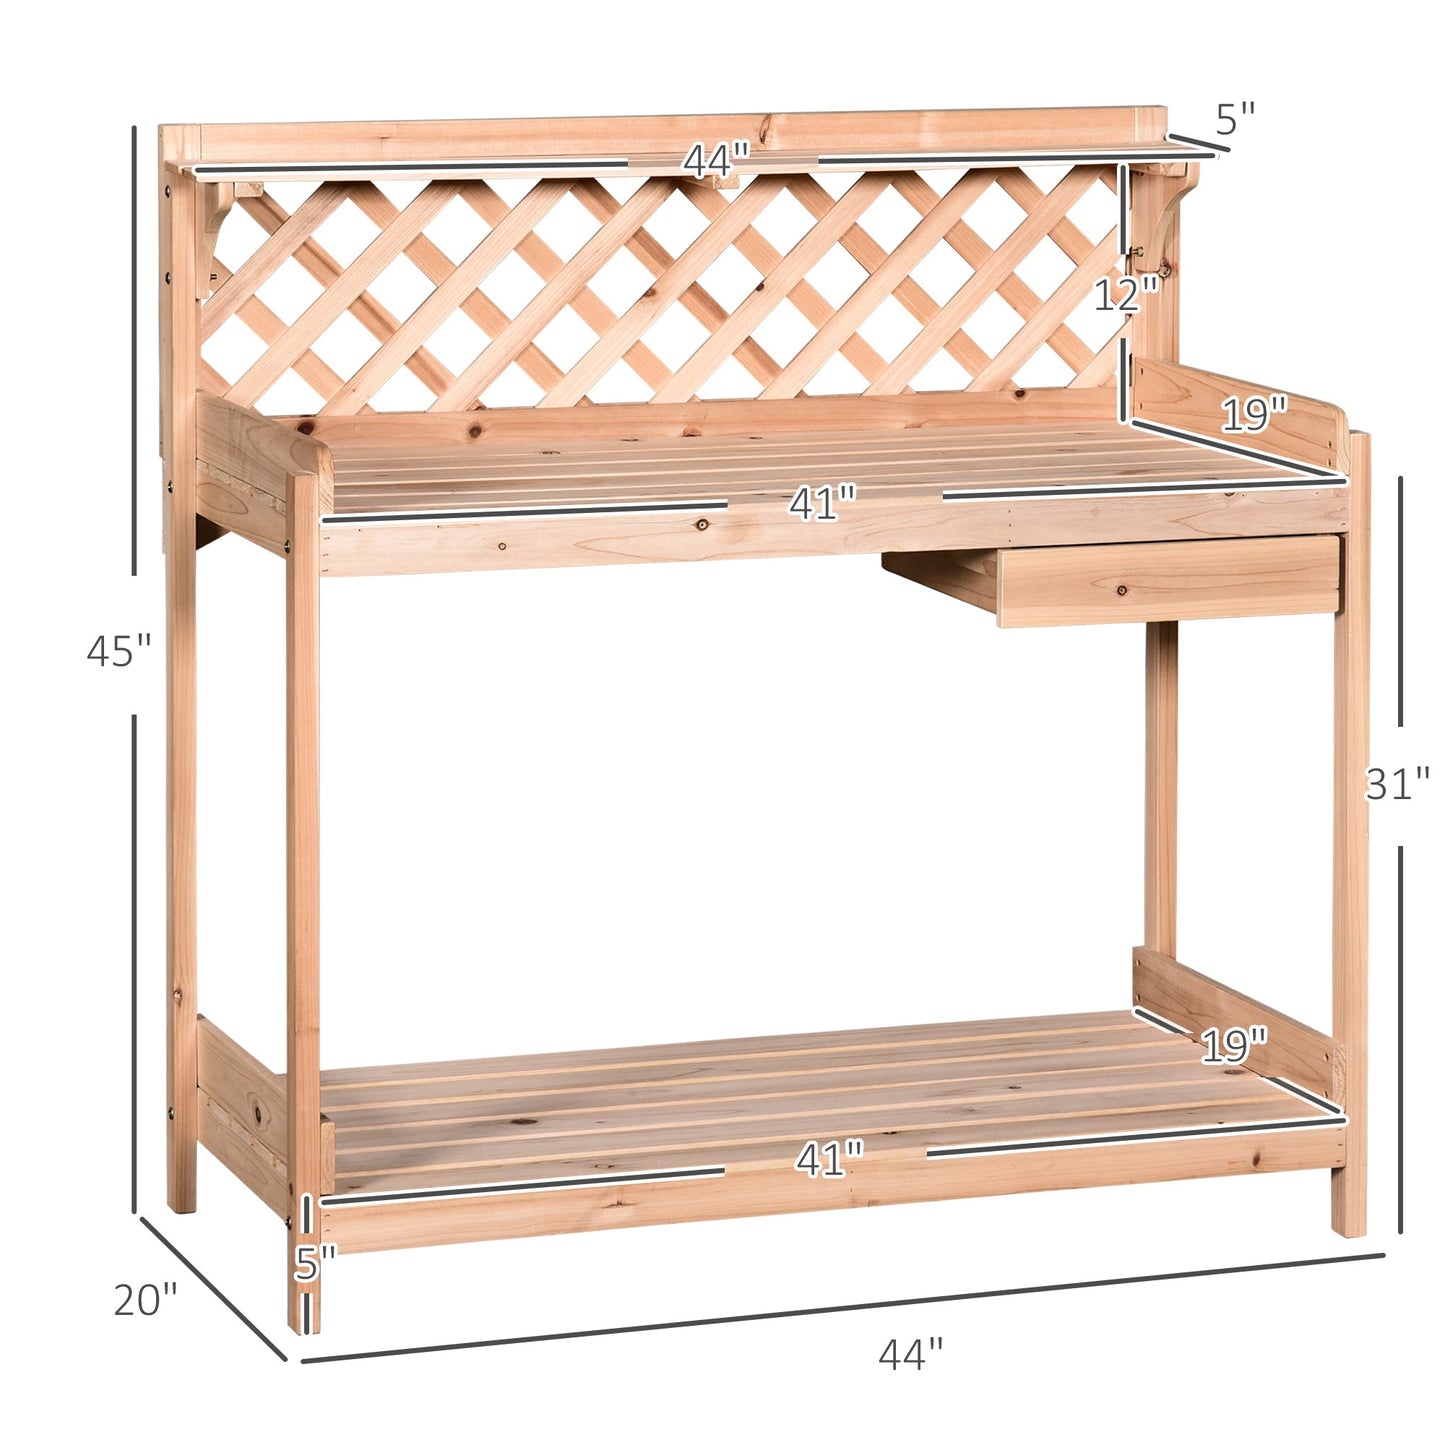 Outdoor and Garden-Outdoor Garden Potting Bench, Wooden Workstation Table With Drawers - Outdoor Style Company